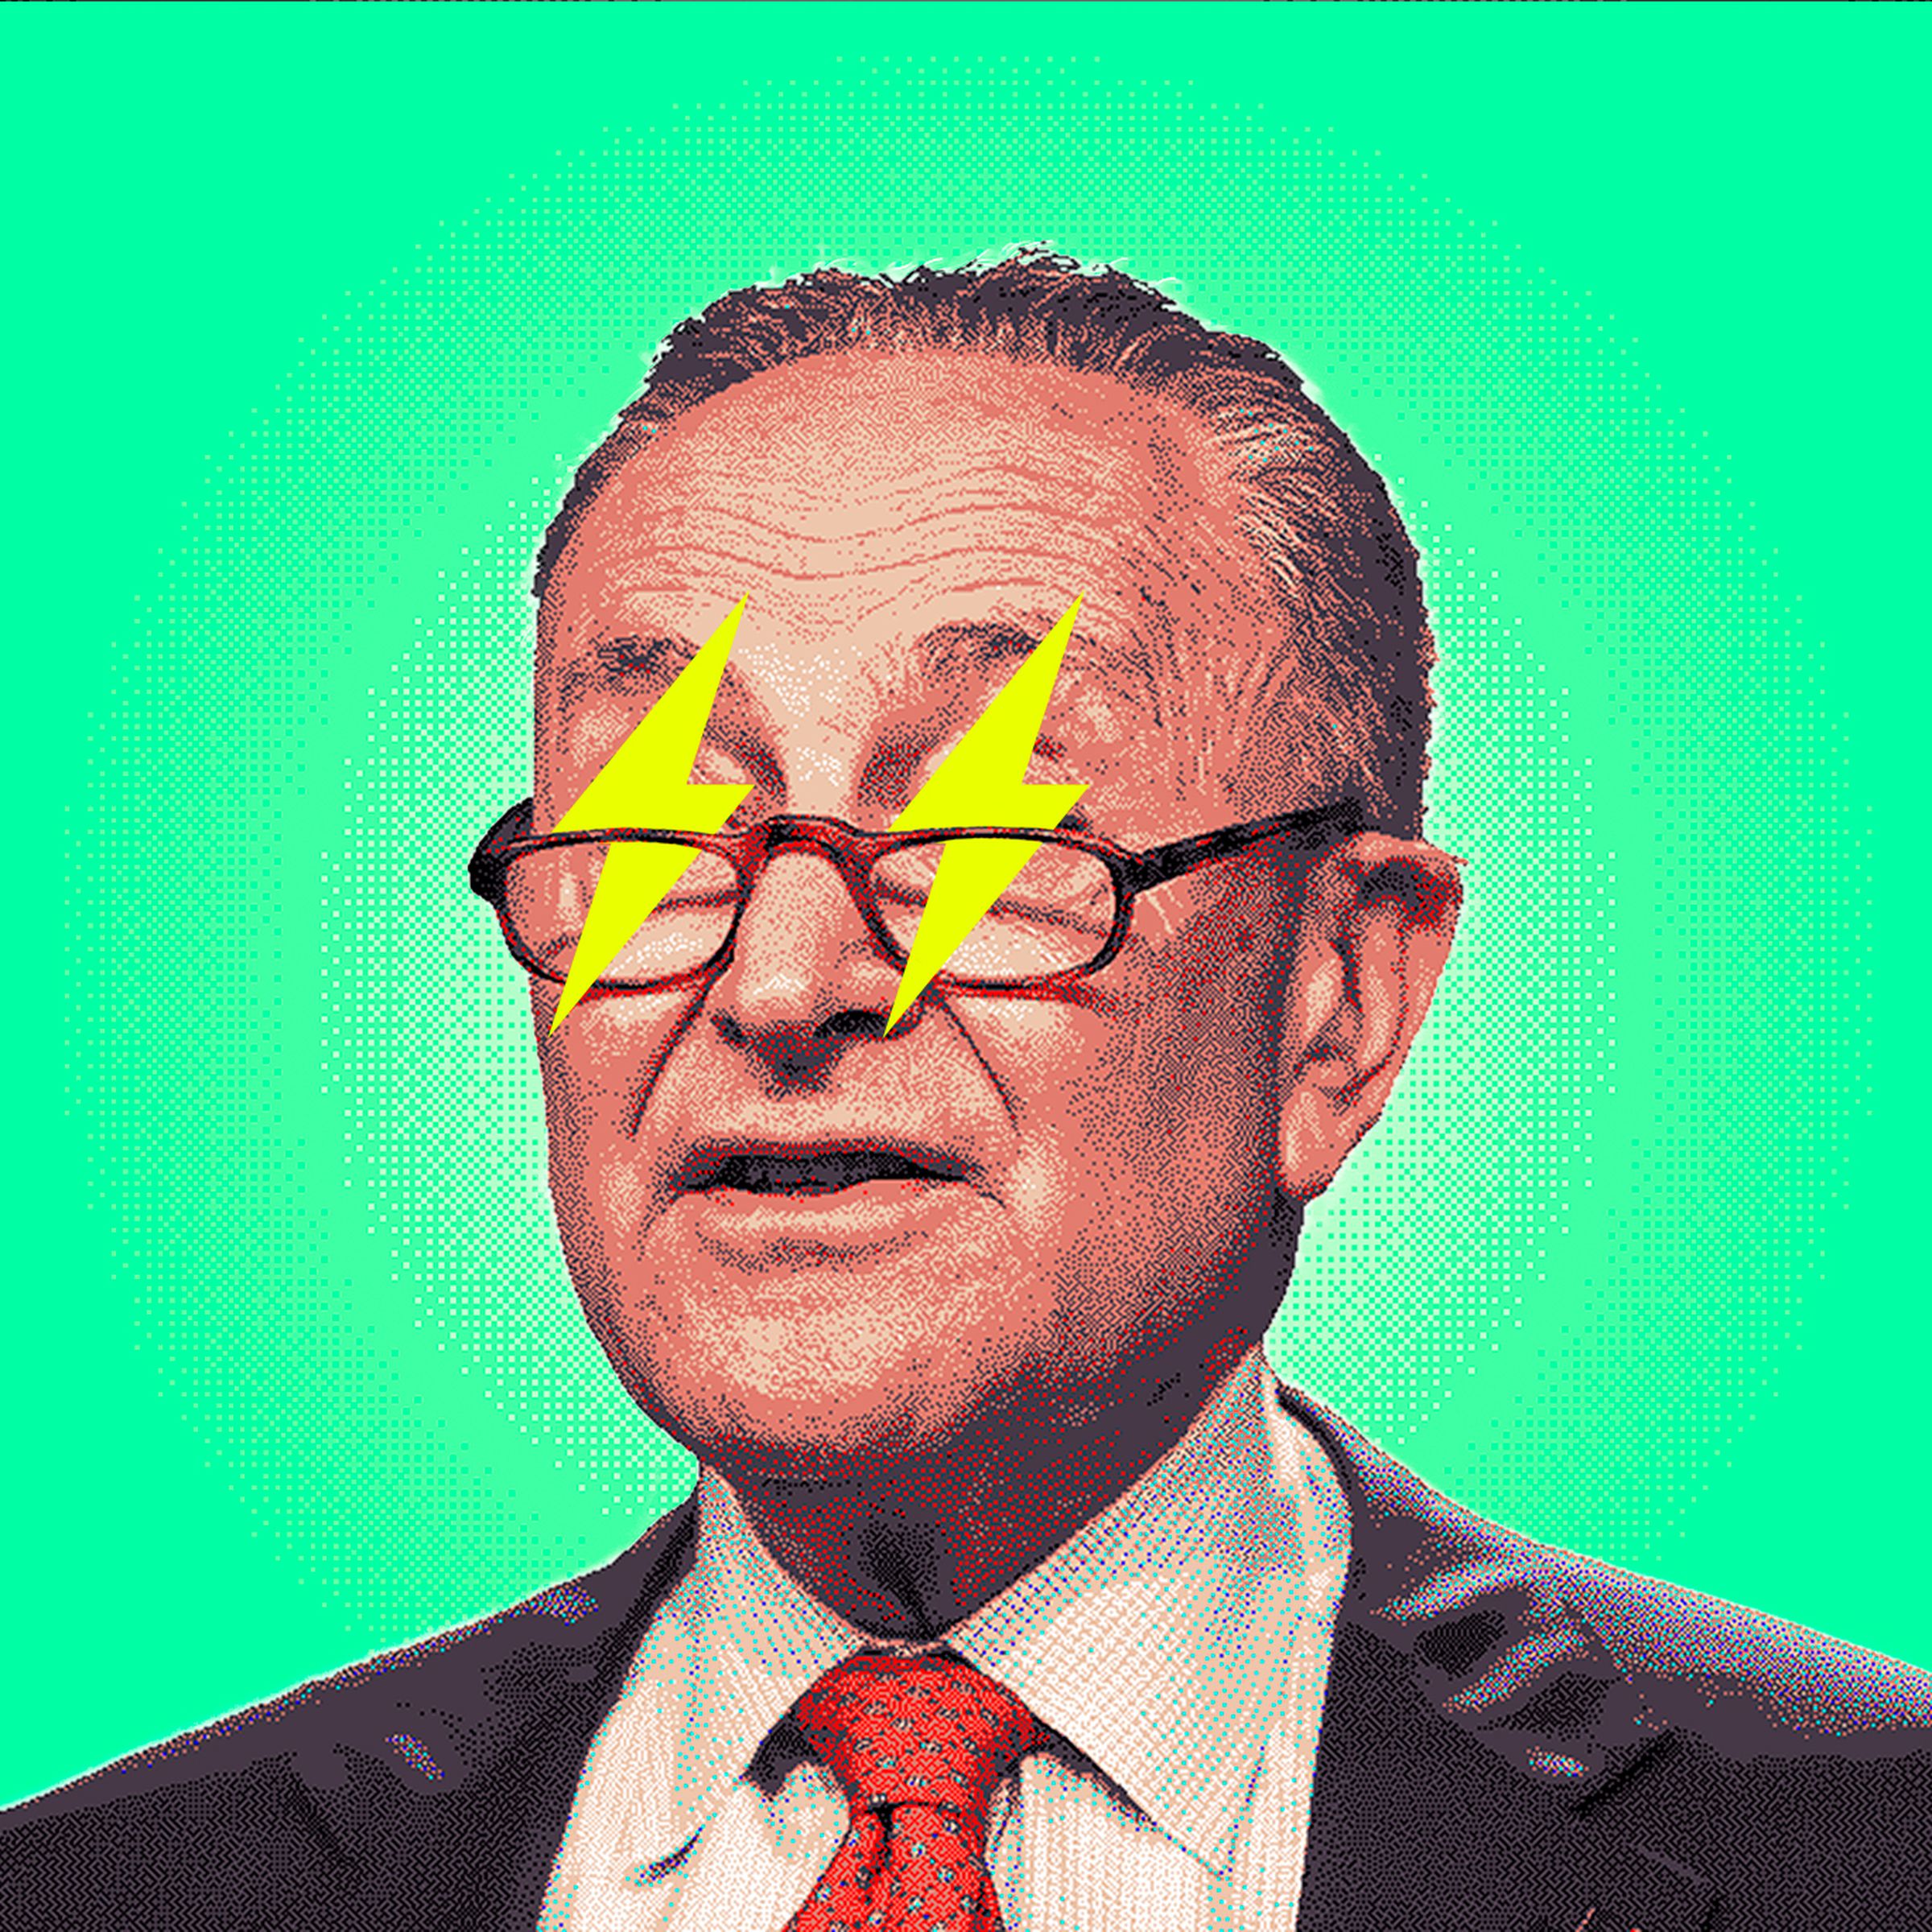 A photo illustration of Chuck Schumer with yellow lightning bolts covering his eyes.